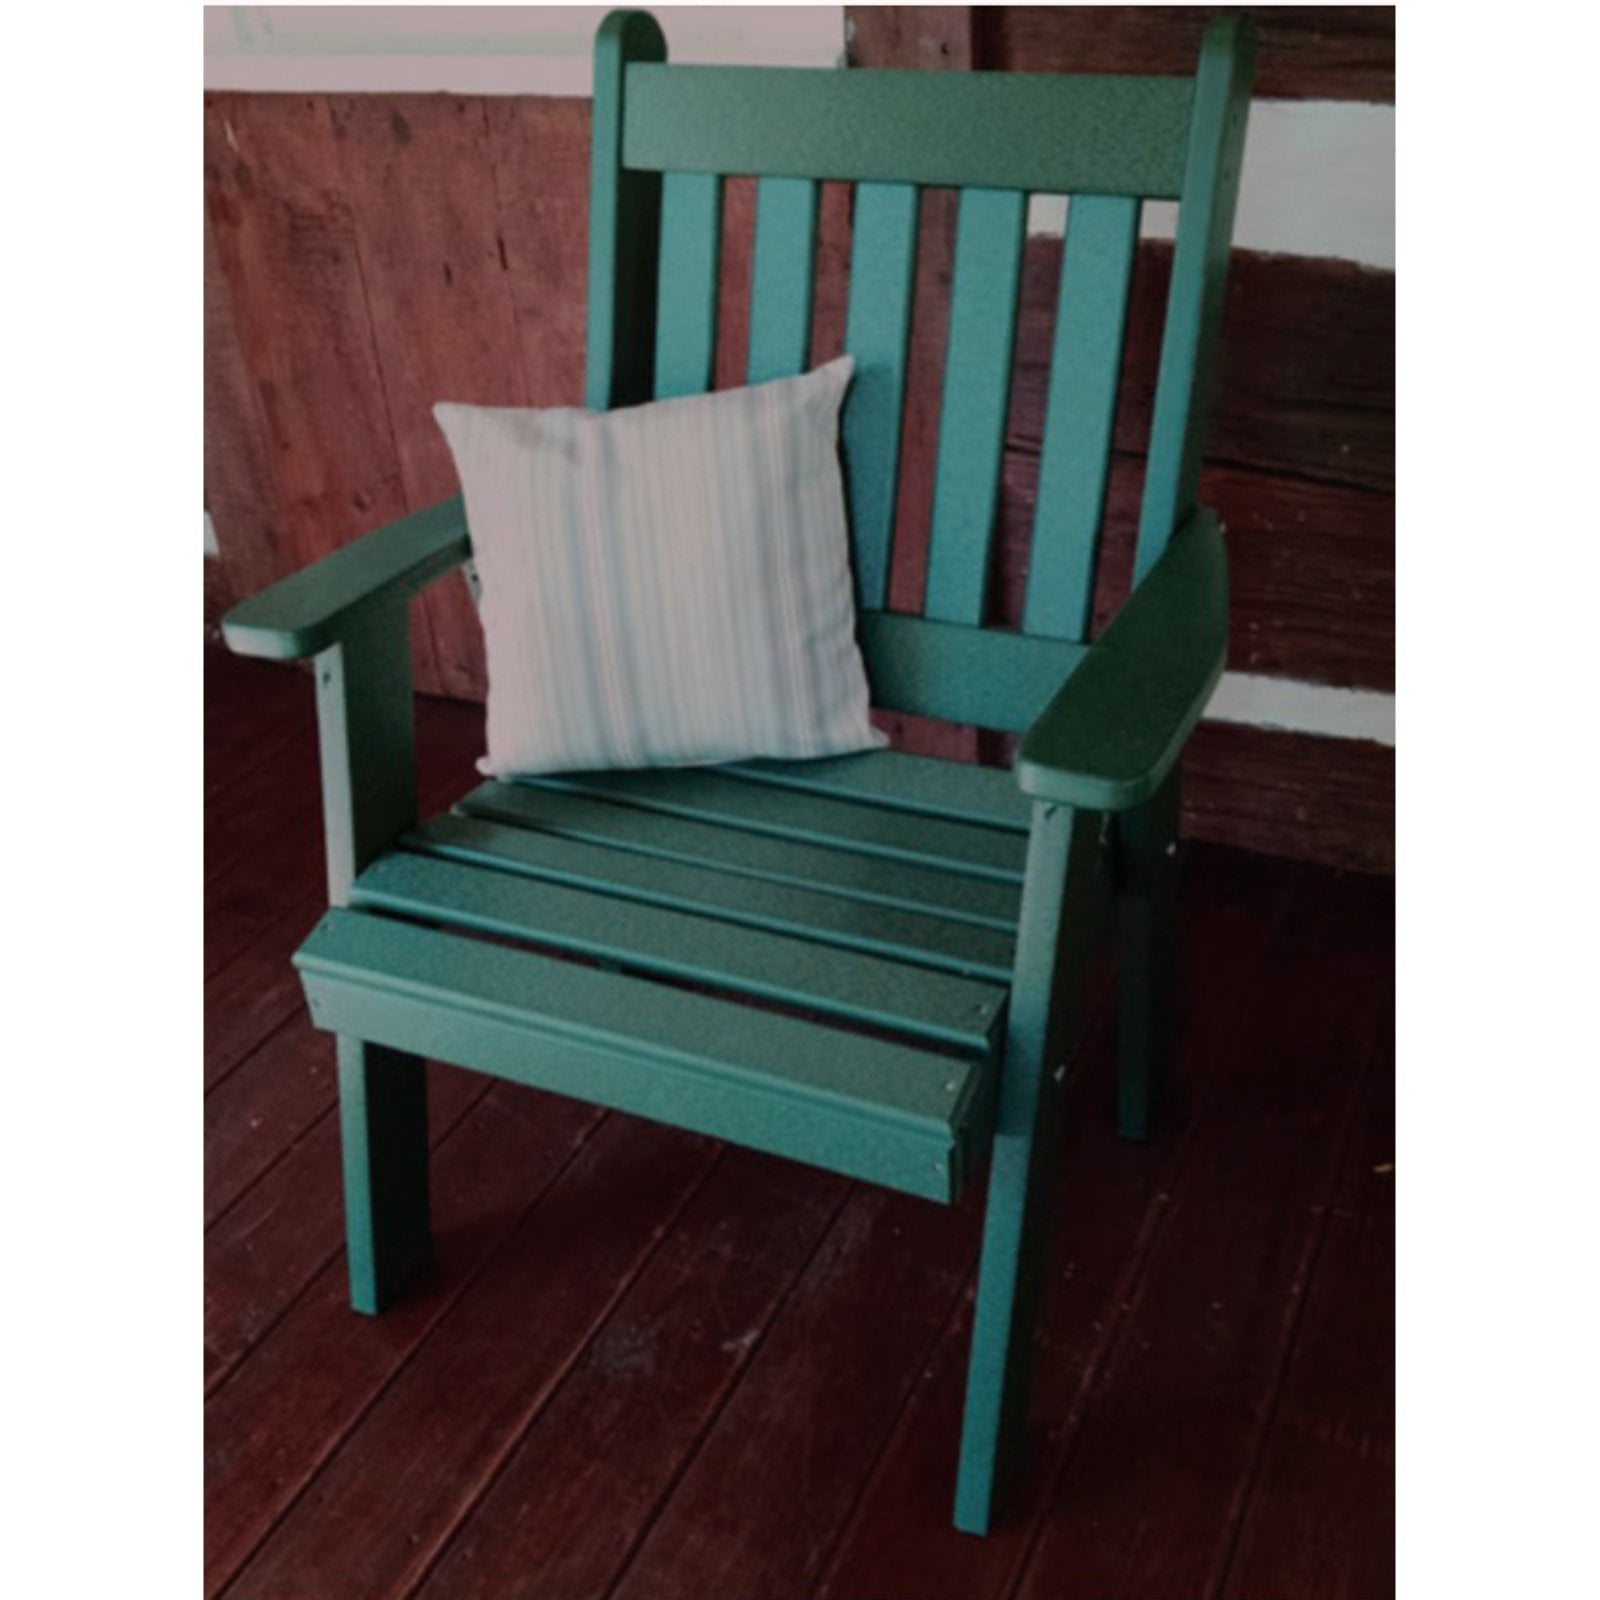 Featured image of post Plastic Patio Chairs Walmart / Plastic patio chairs built to withstand a very high capacity.